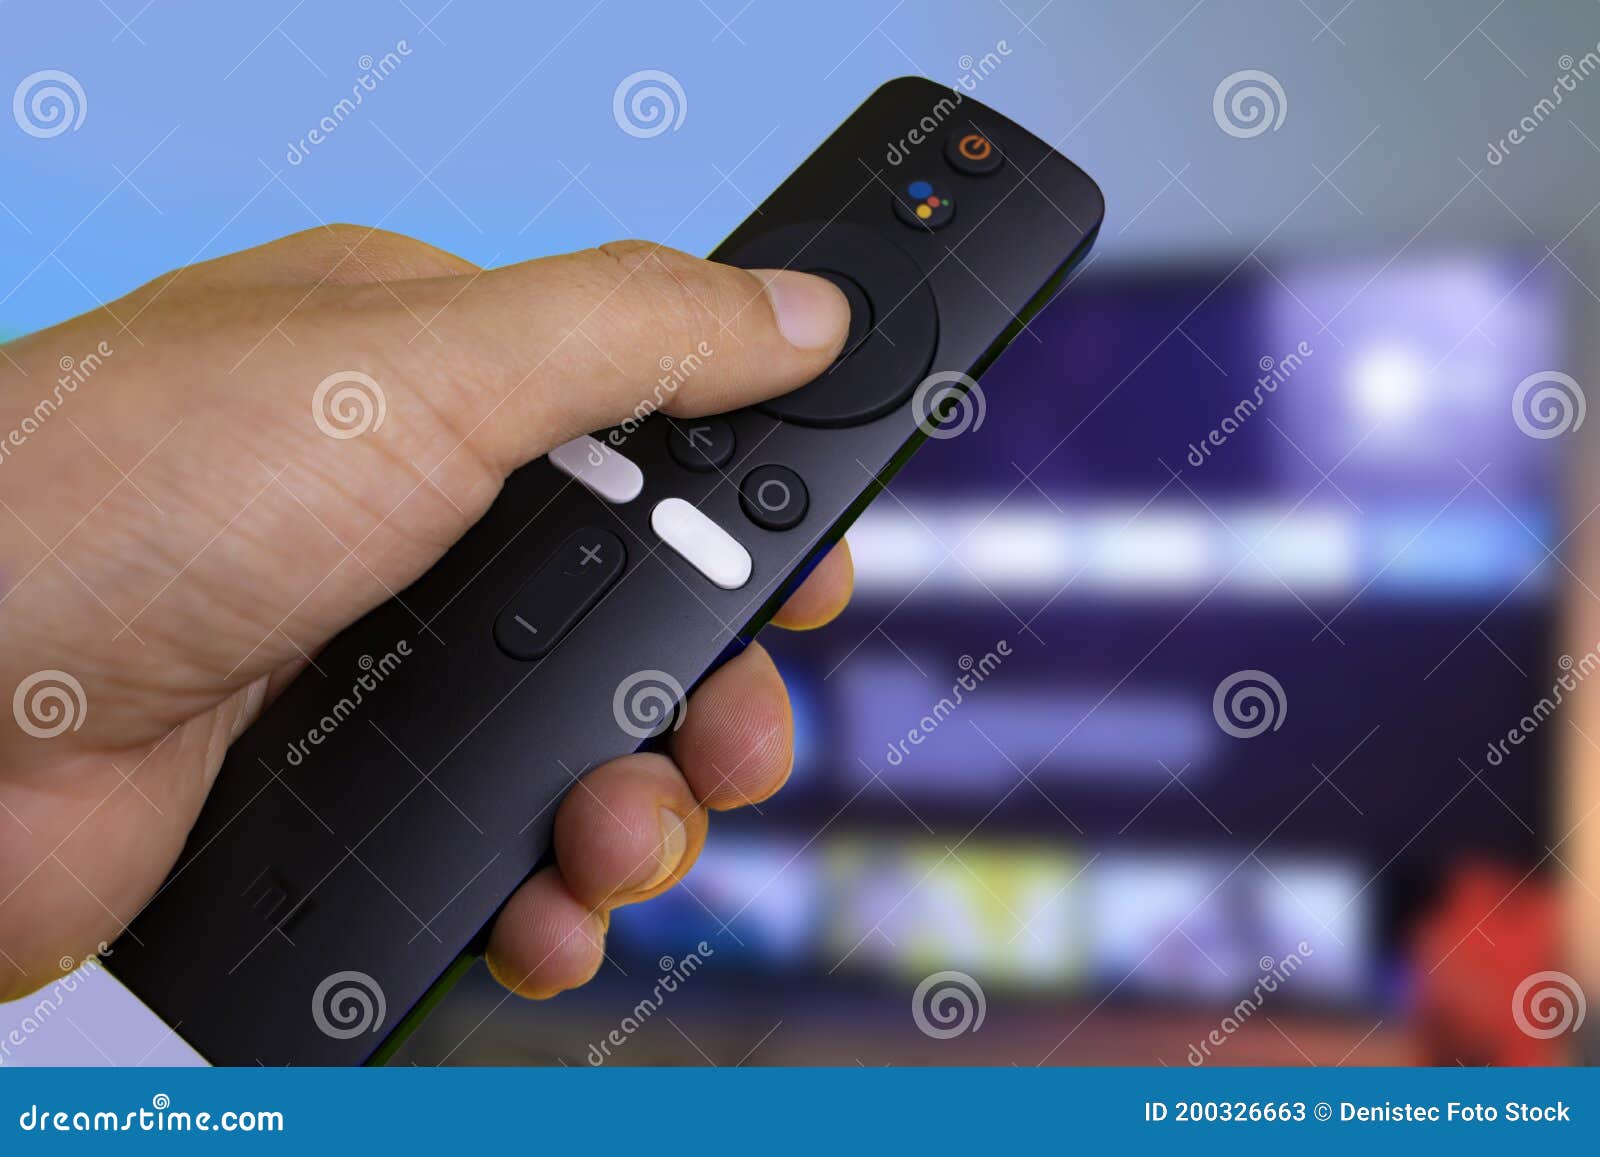 xiaomi mi tv stick with android tv and remote control in smart tv